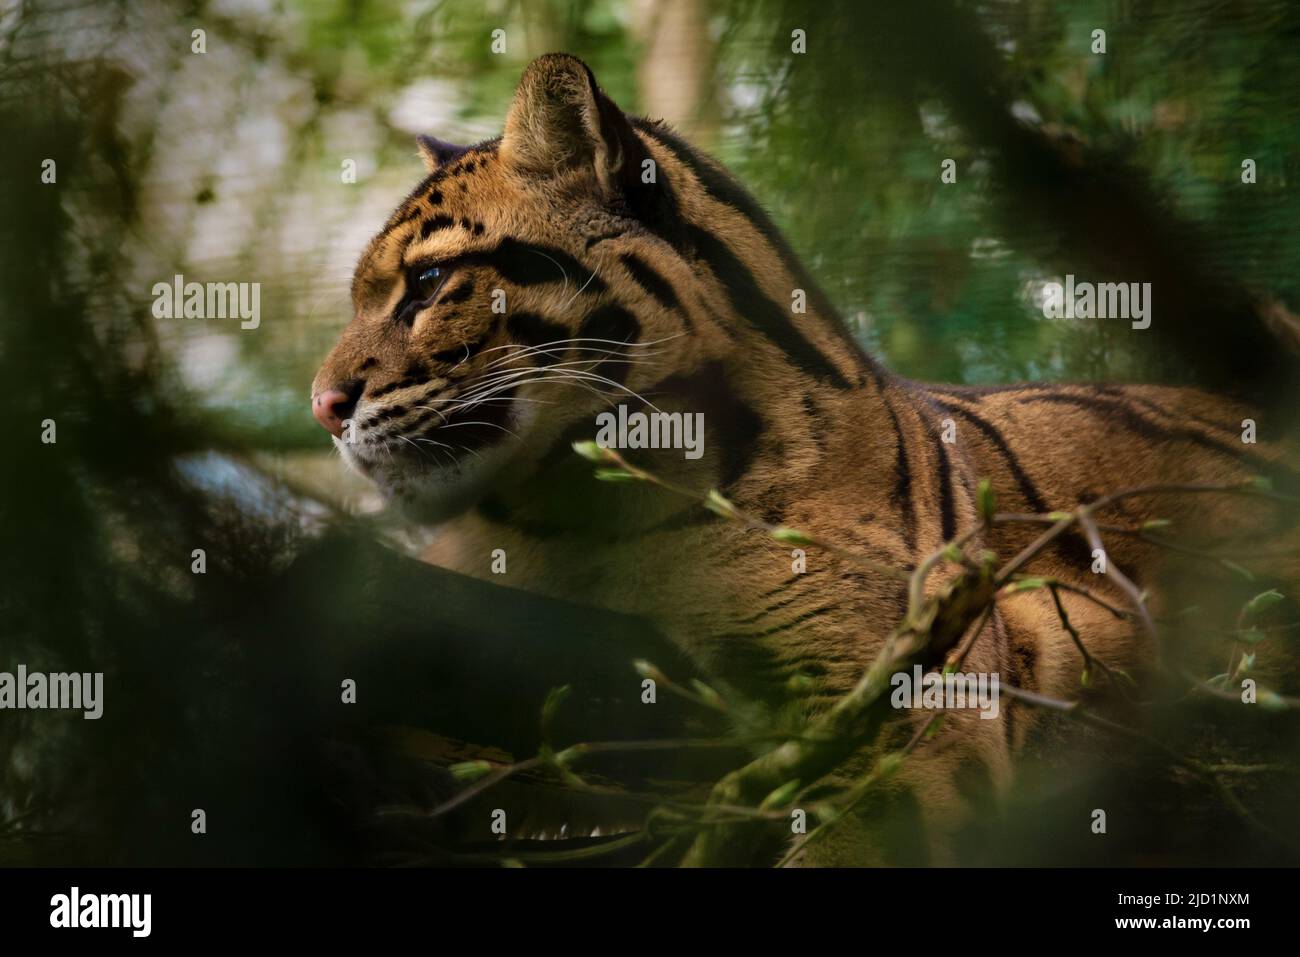 The clouded leopard perched on its branch. Conservation of endangered animal species. Beauty of nature. Stock Photo